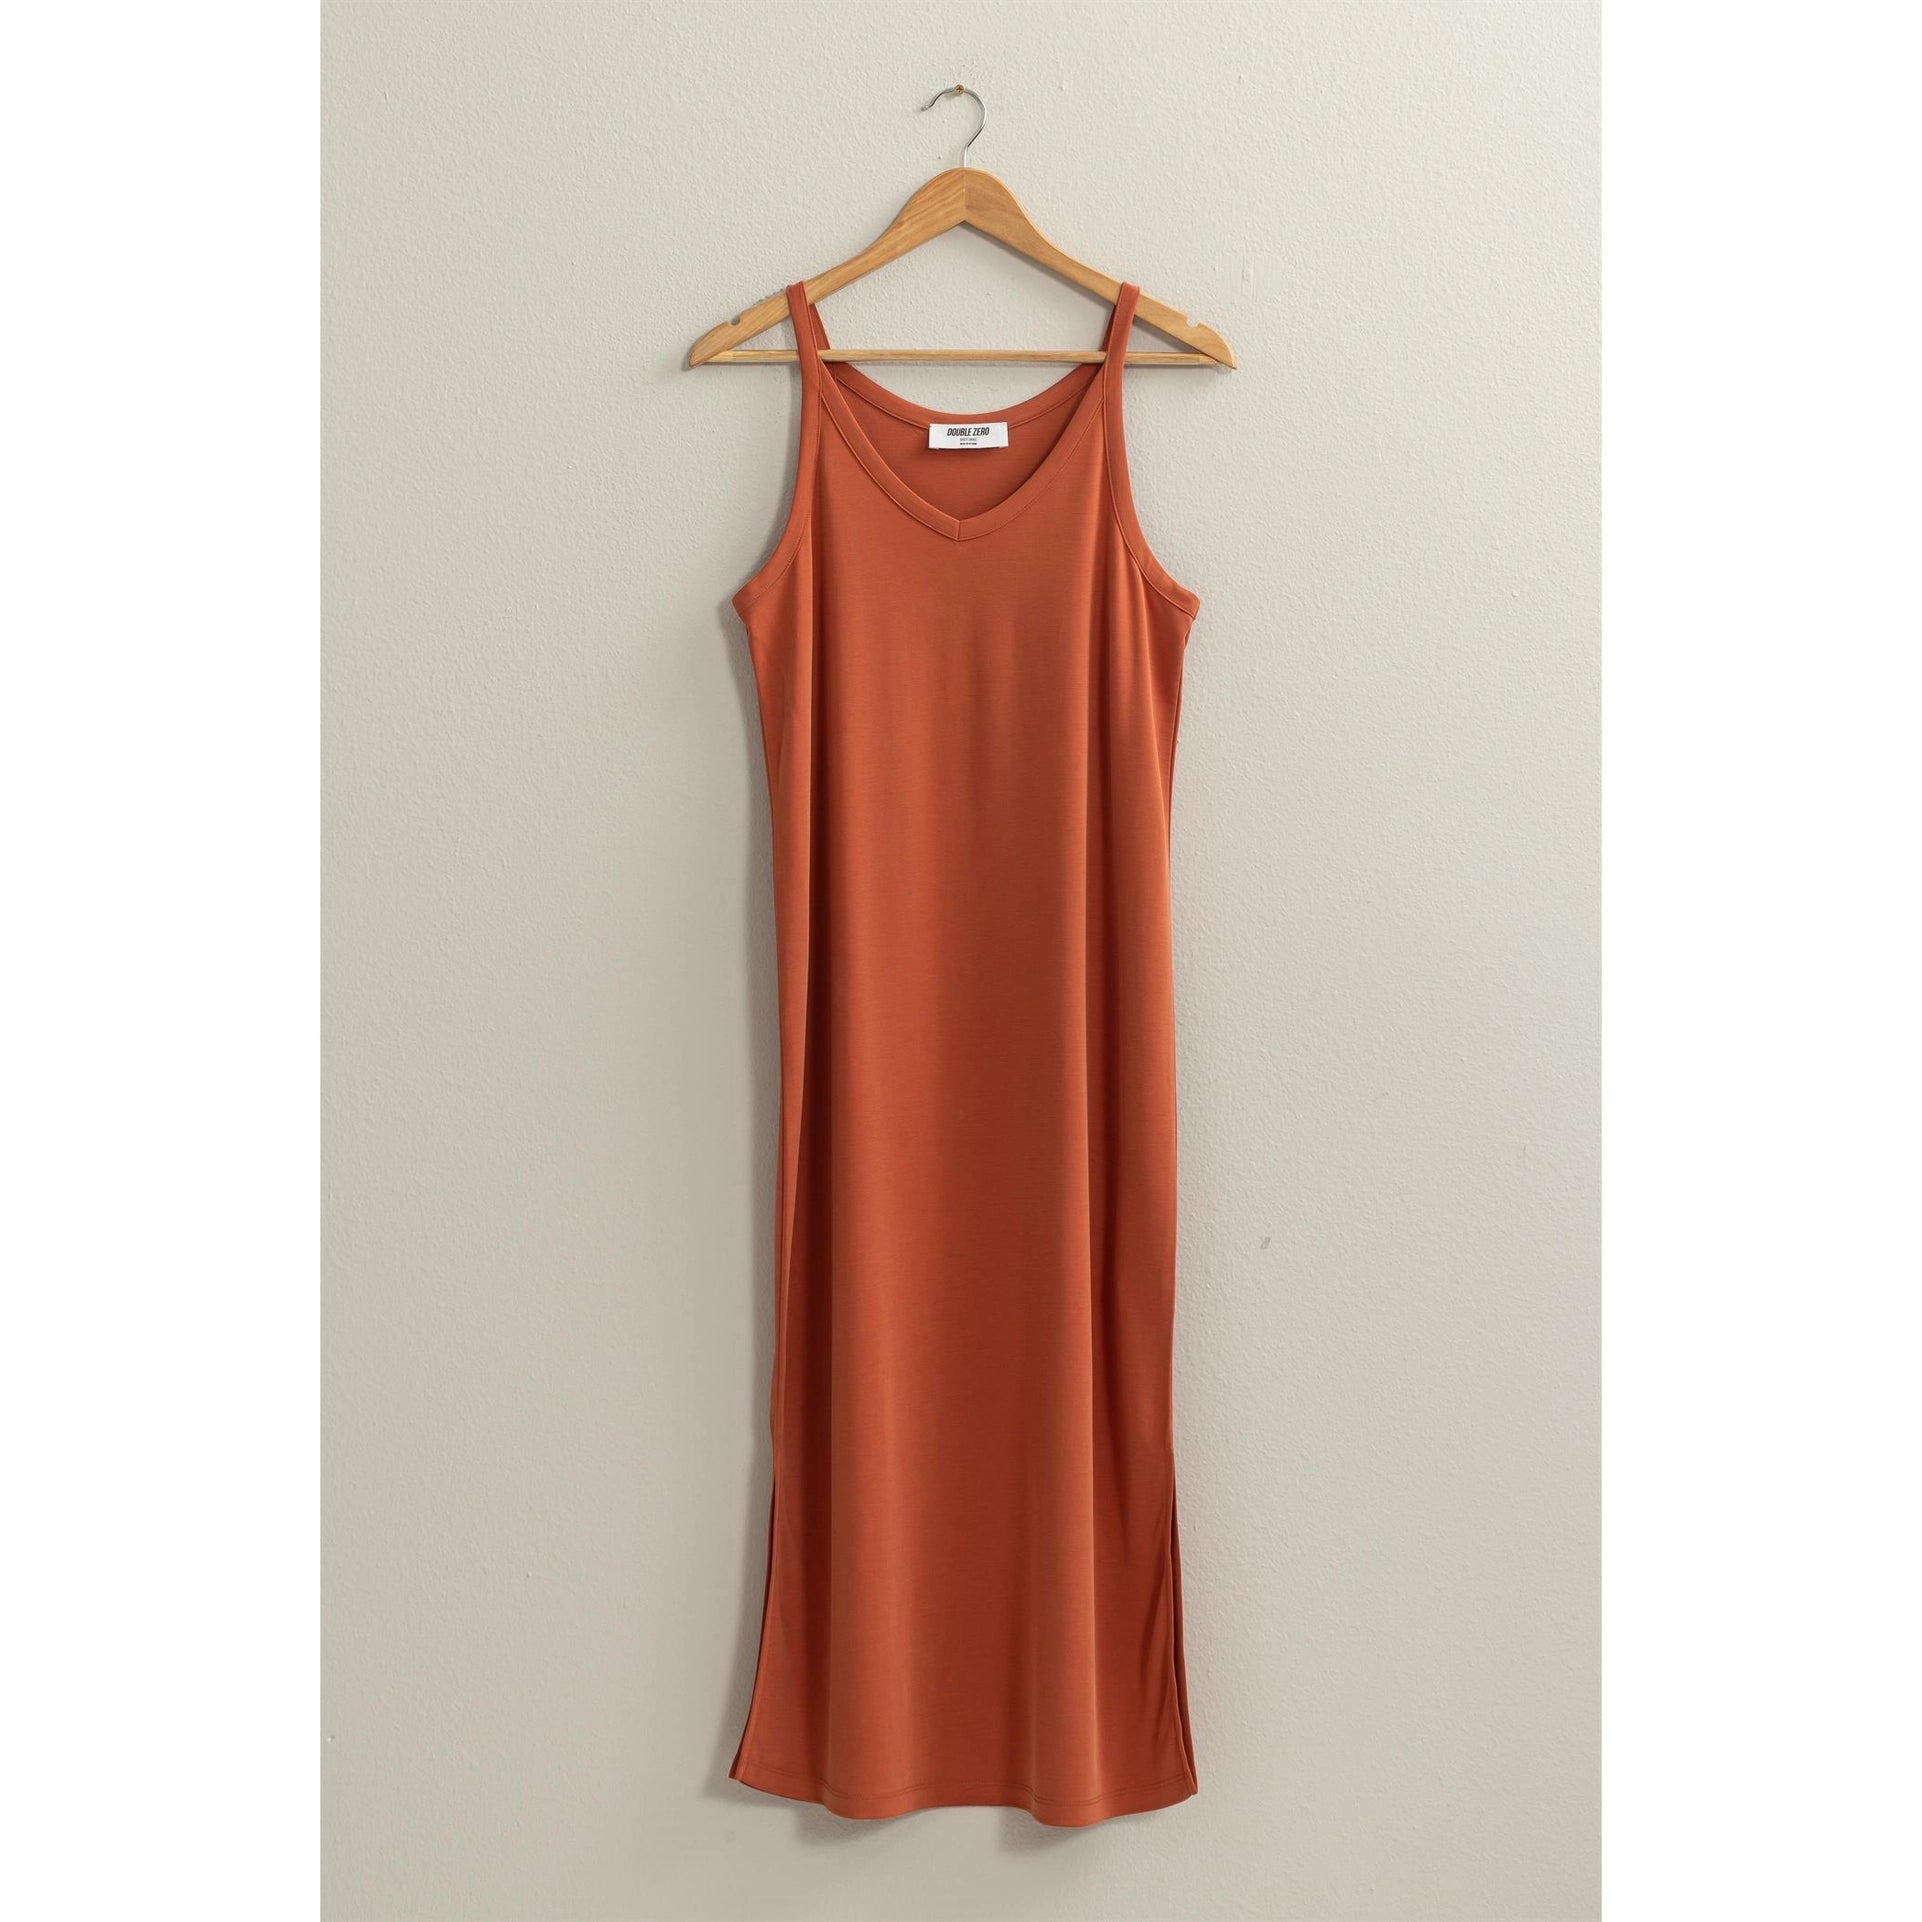 Robin V-Neck Midi DressEARN YOURSELF SOME STYLE POINTS THIS SEASON WITH THIS CUTE MIDI DRESS. DESIGNED FROM A SOFT FABRIC, IT HAS A RELAXED FIT THAT'S PERFECT FOR LAID BACK DAYS, BOASTING A V NECK AND SHOULDER STRAPS. TWIN SIDE SLITS OFFER A FLOWY STYLE.